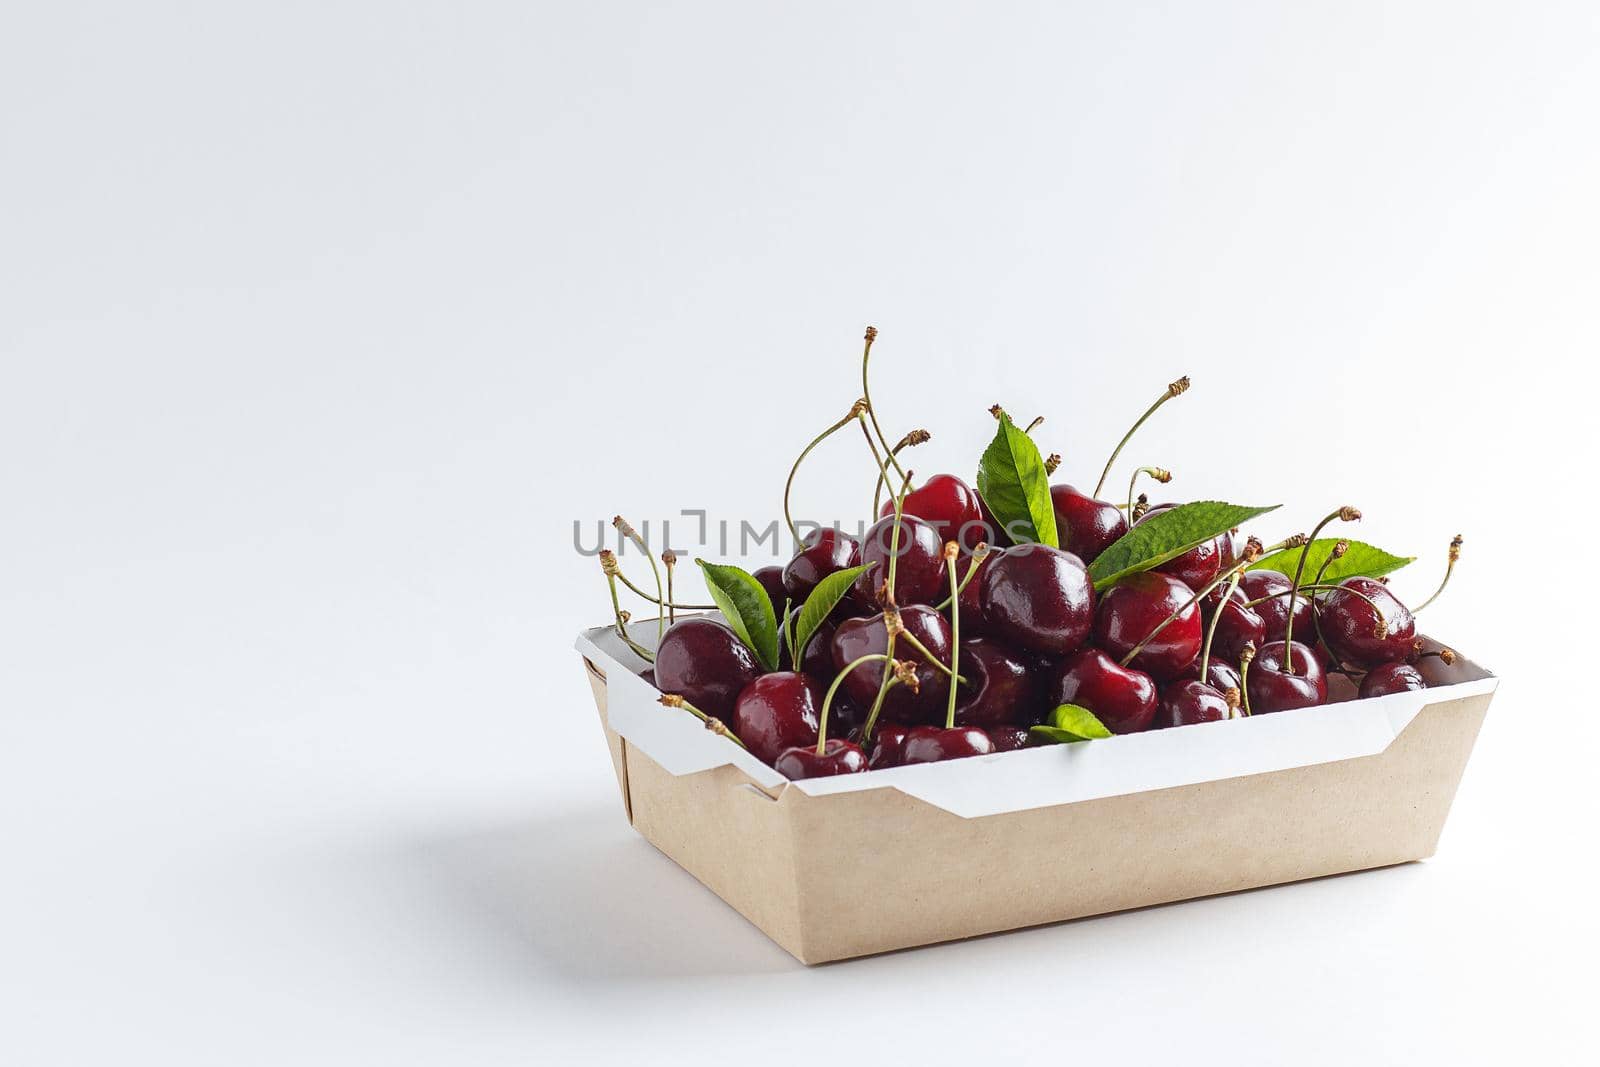 Fresh, ripe cherries in a cardboard box on a white background. Copy space by lara29